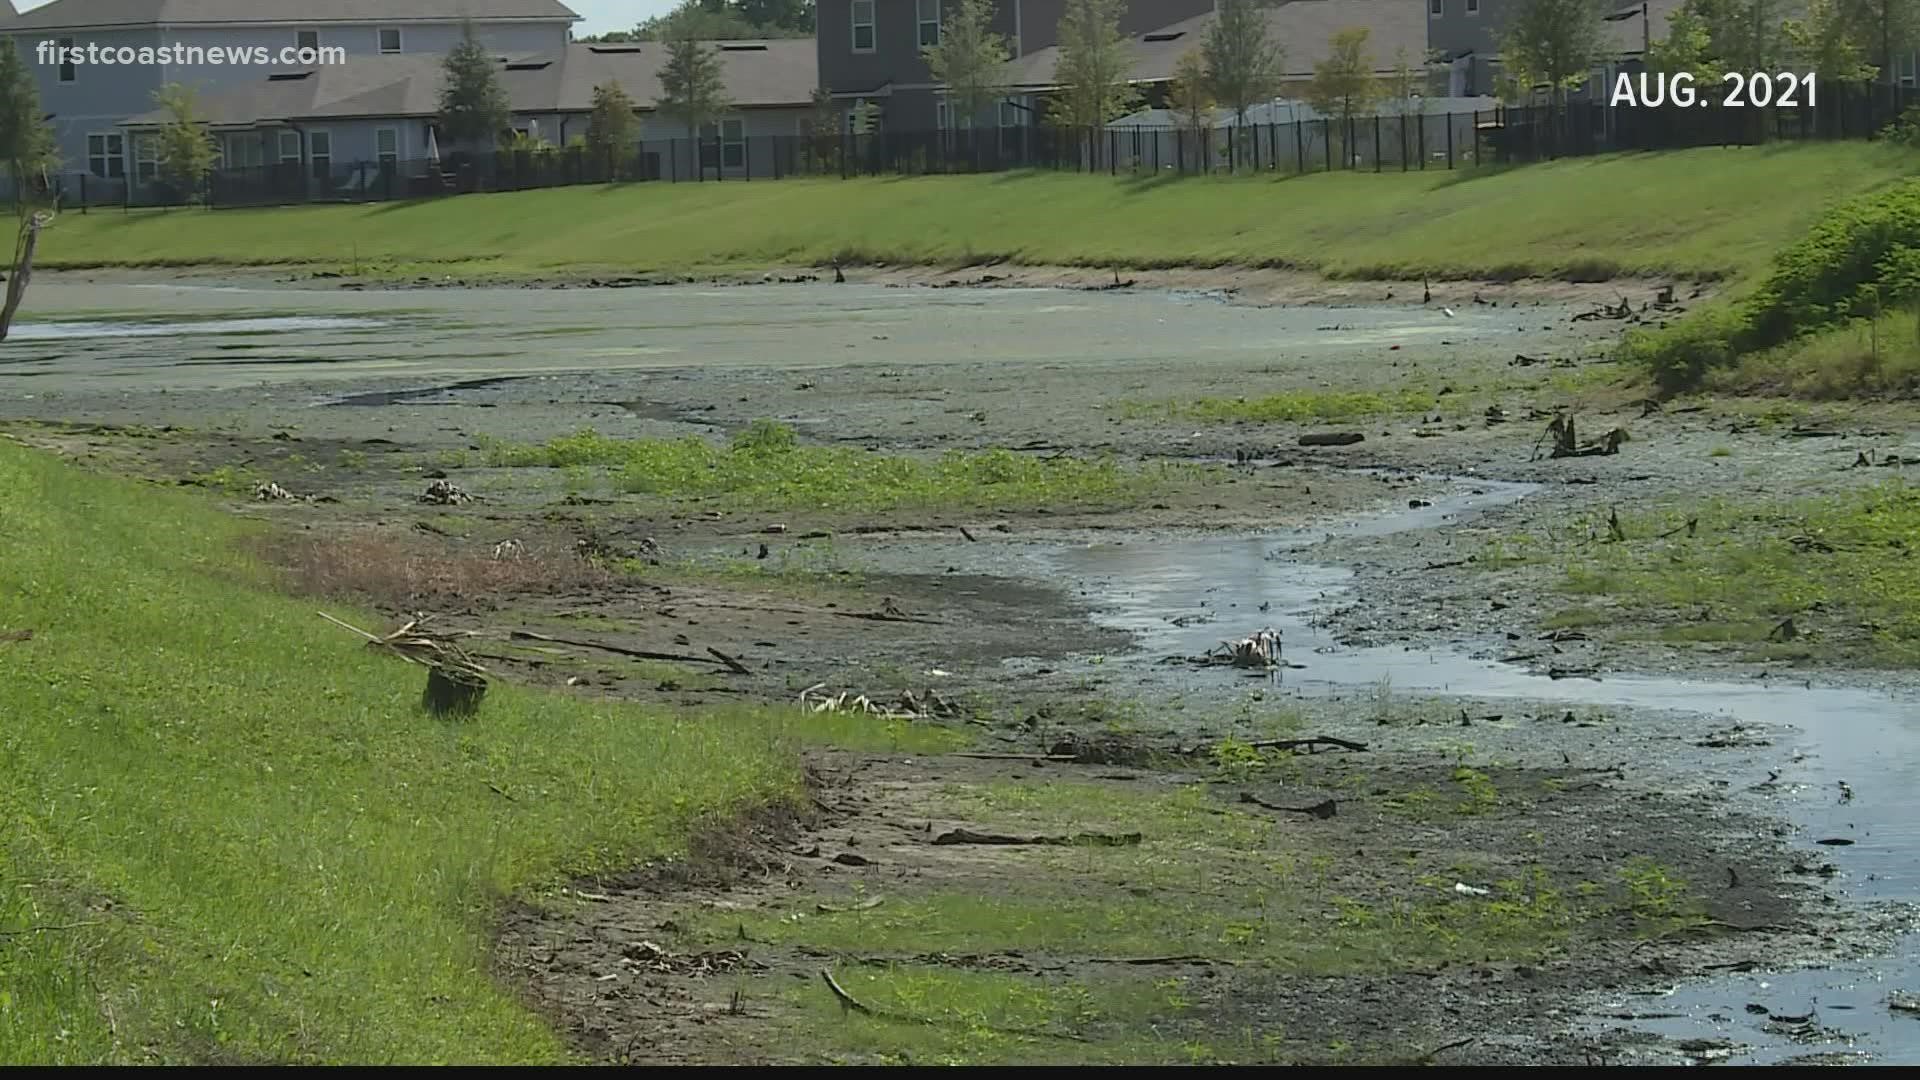 Jacksonville City Councilmember Danny Becton says the developer, D.R. Horton, adjusted the drainage outfall, which eventually brought the lake level back.